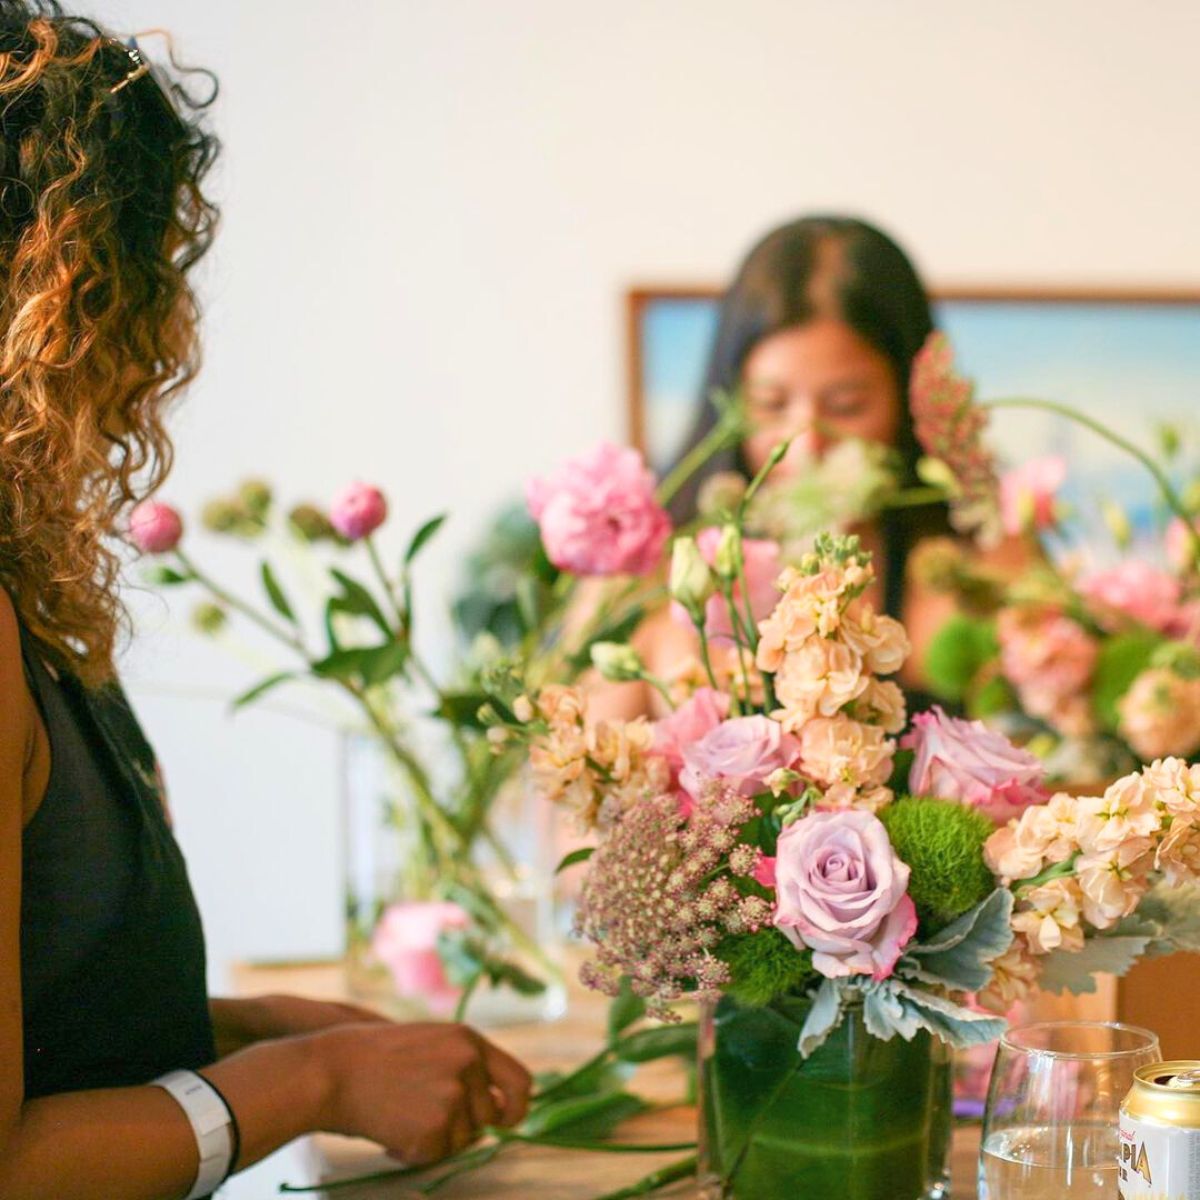 Weekend floral design course at FS